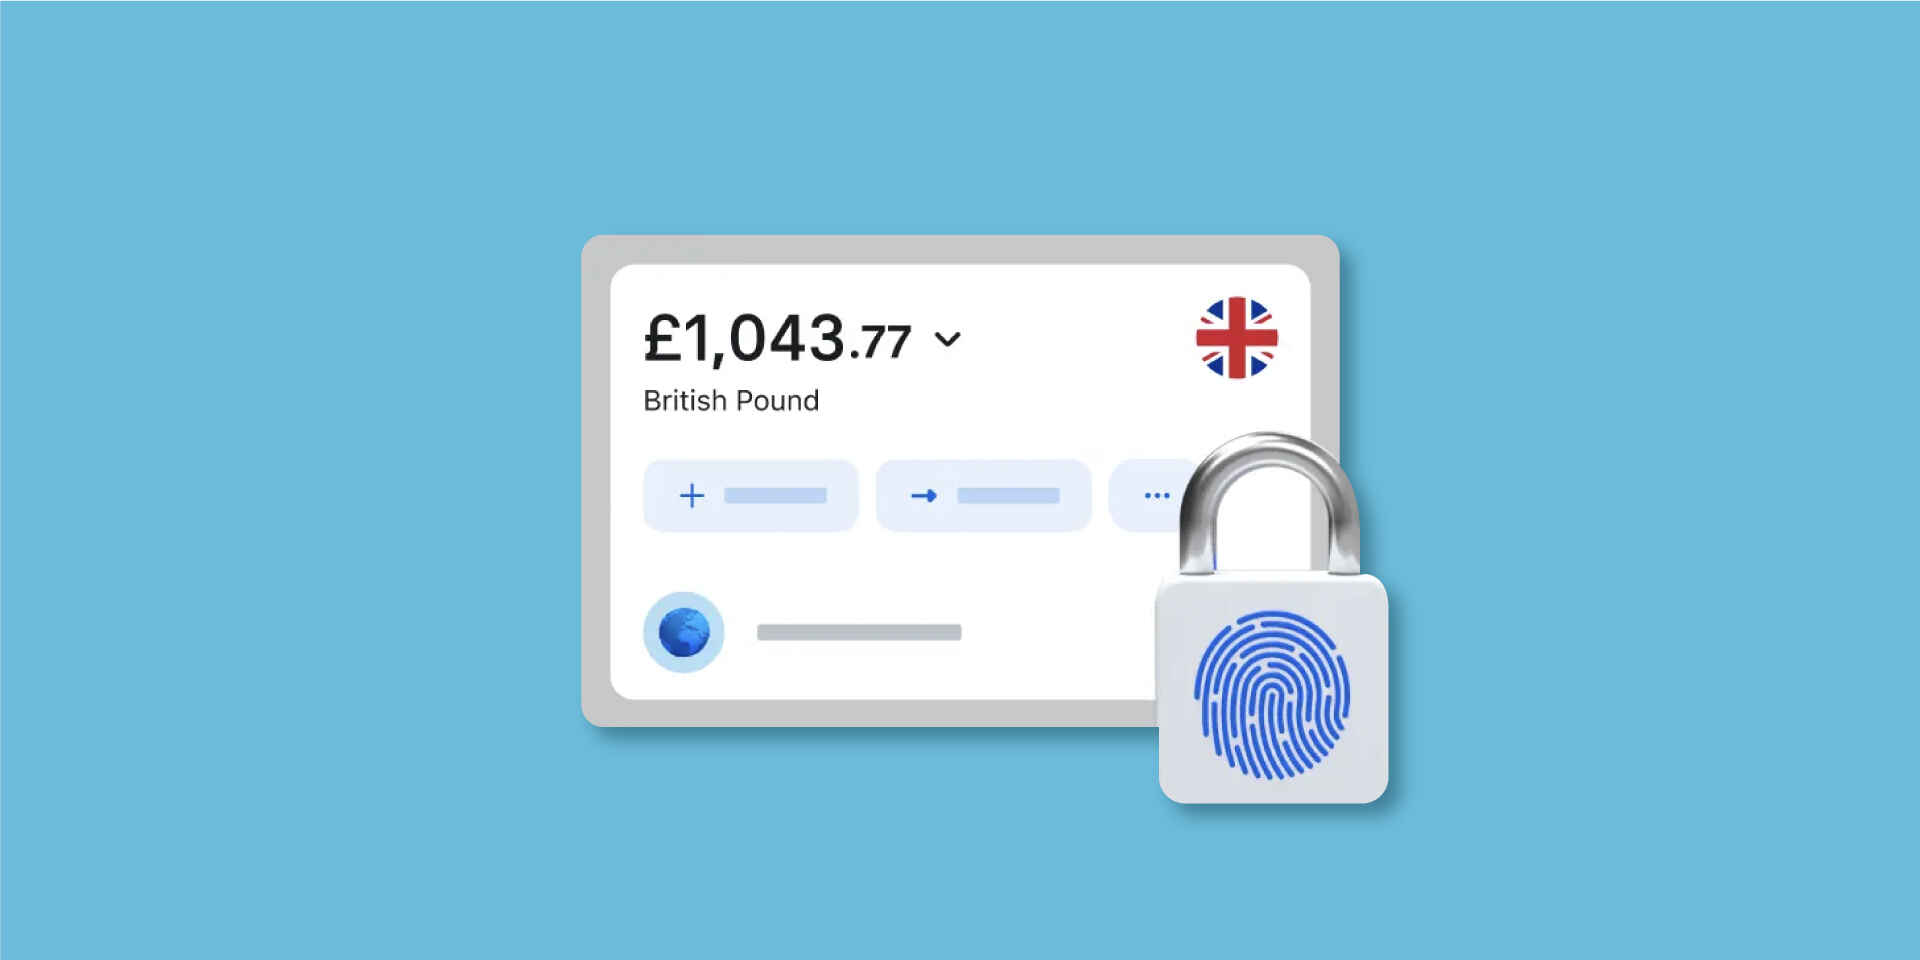 Add security features and notifications in your personal finance app